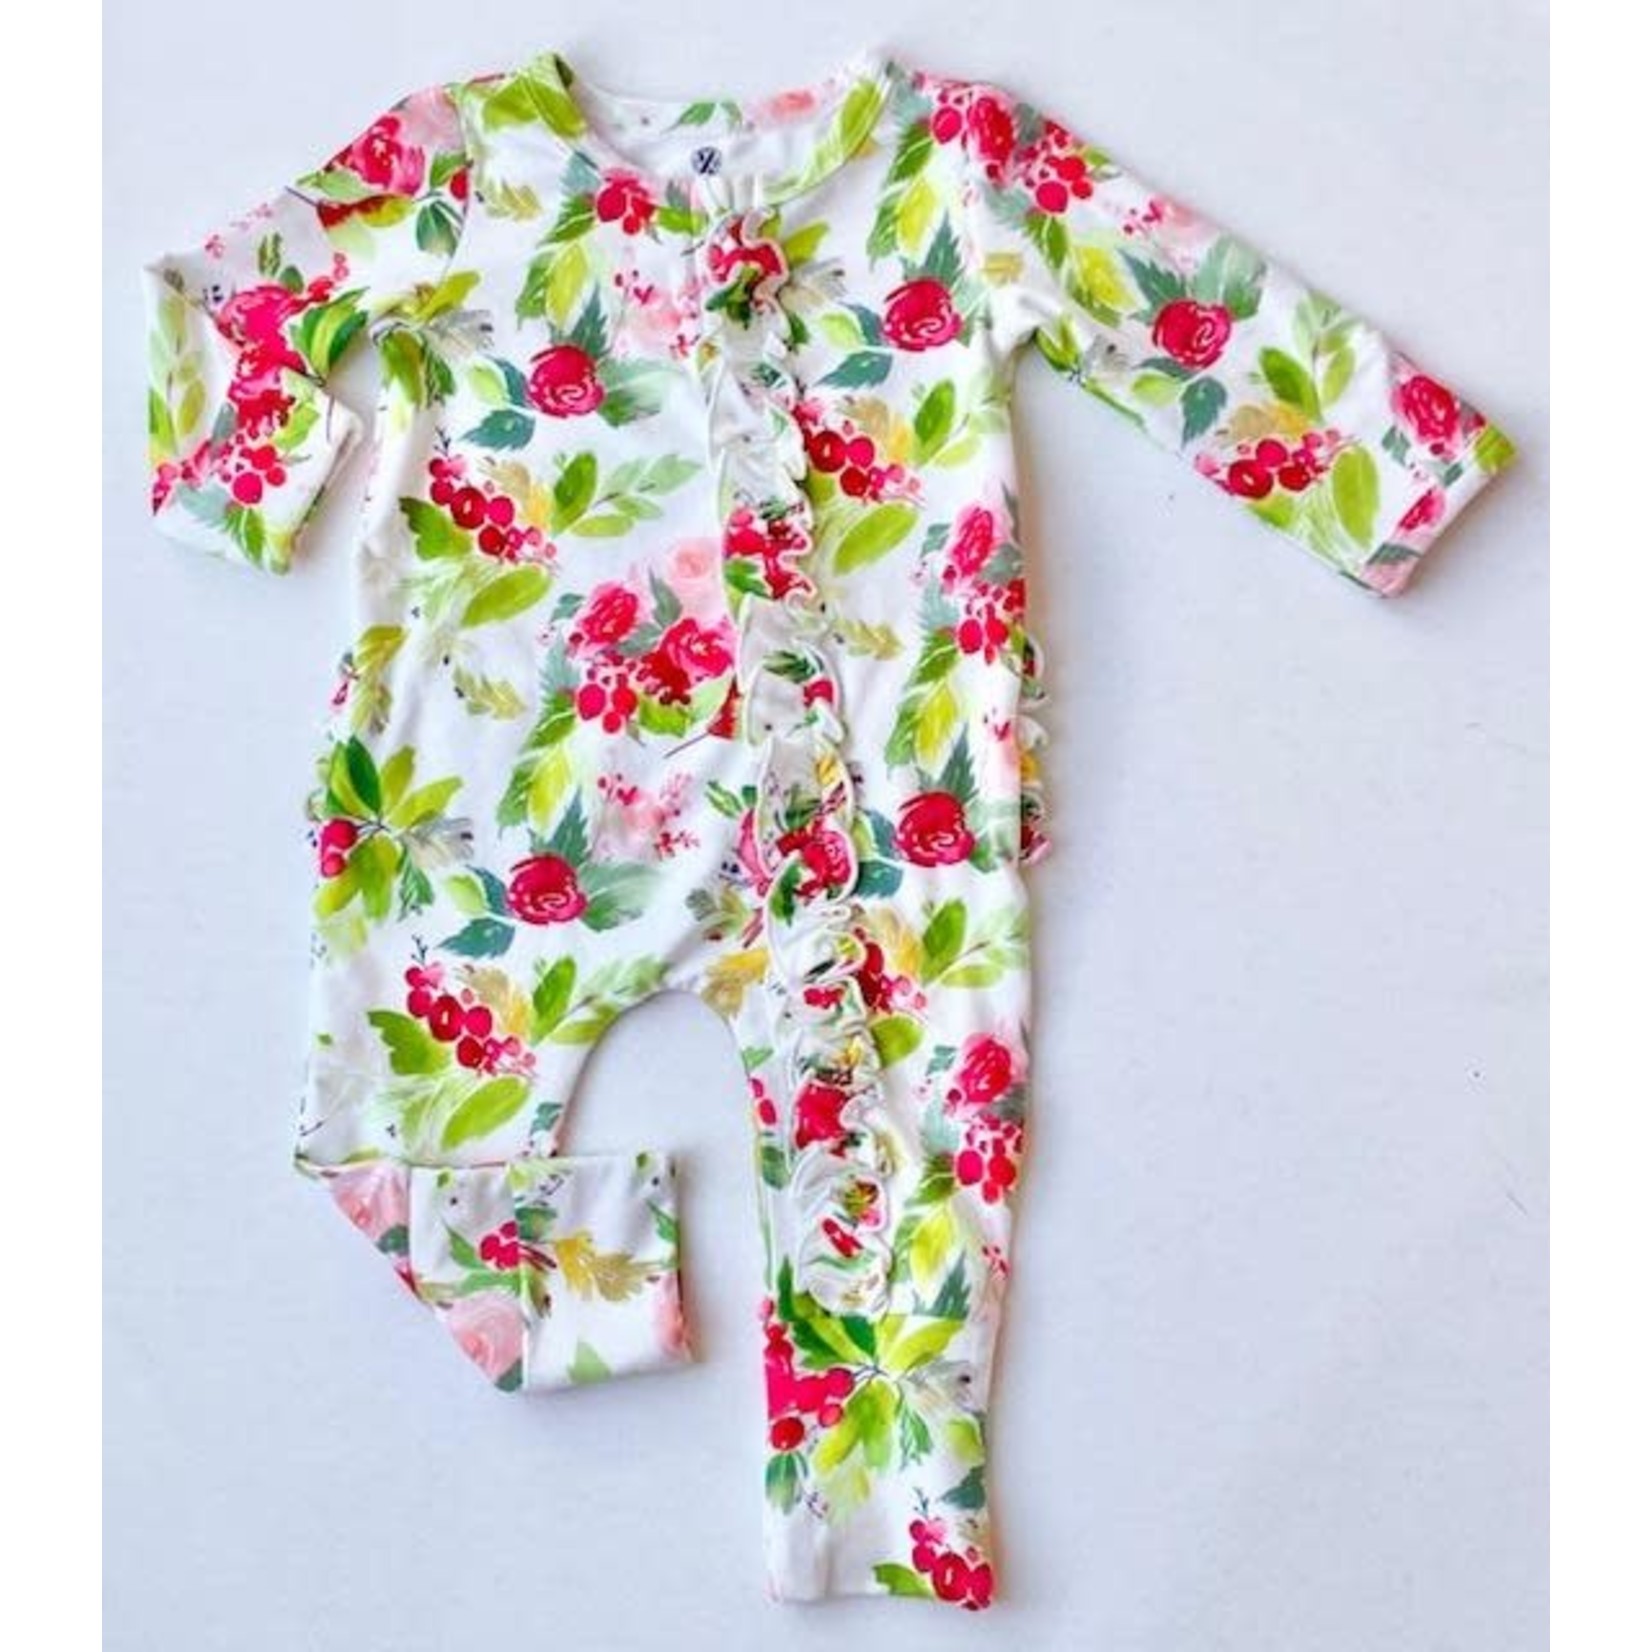 Charlie's Project Holly Berry Ruffle Baby Romper